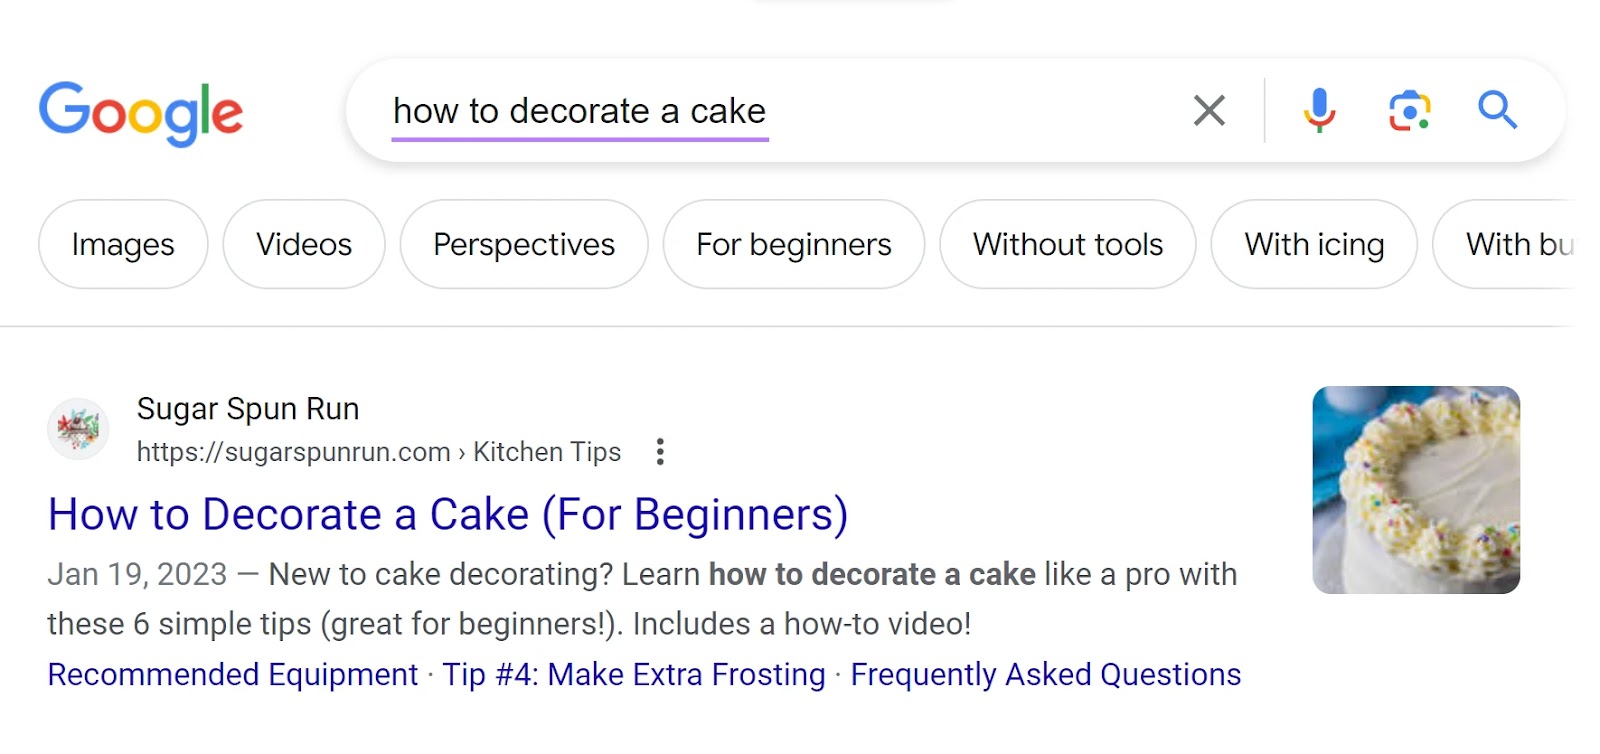 Top of Google's SERP result for "how to decorate a cake"